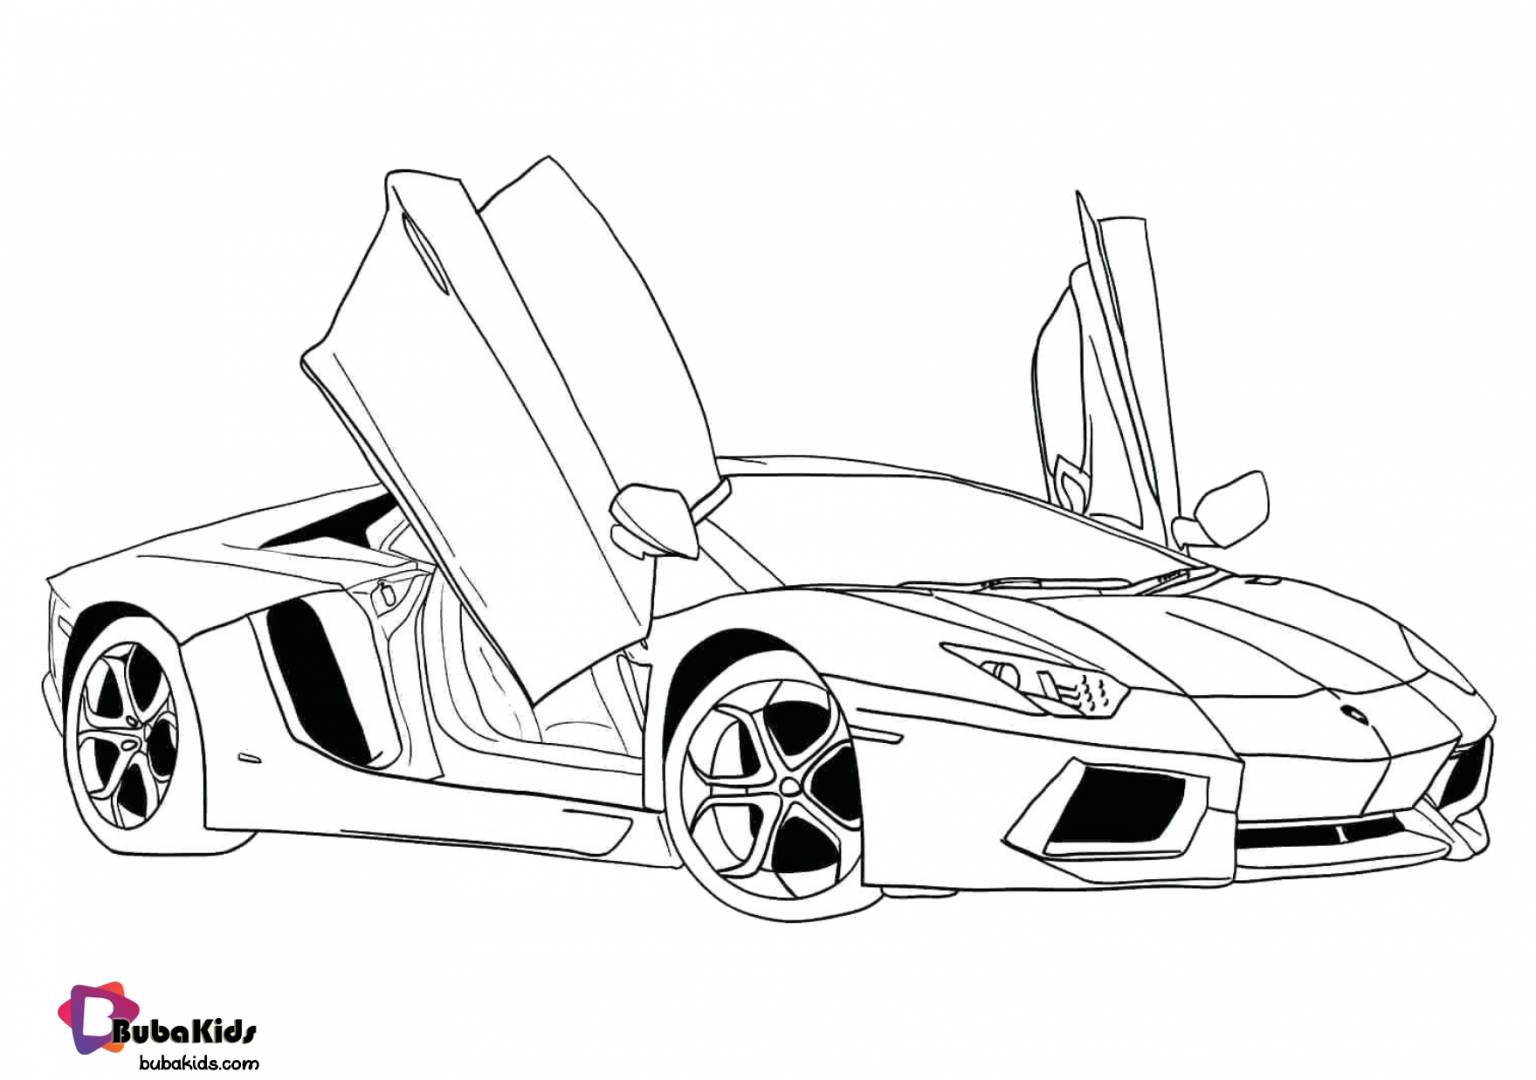 free-download-super-car-coloring-pages-for-kids-bubakids